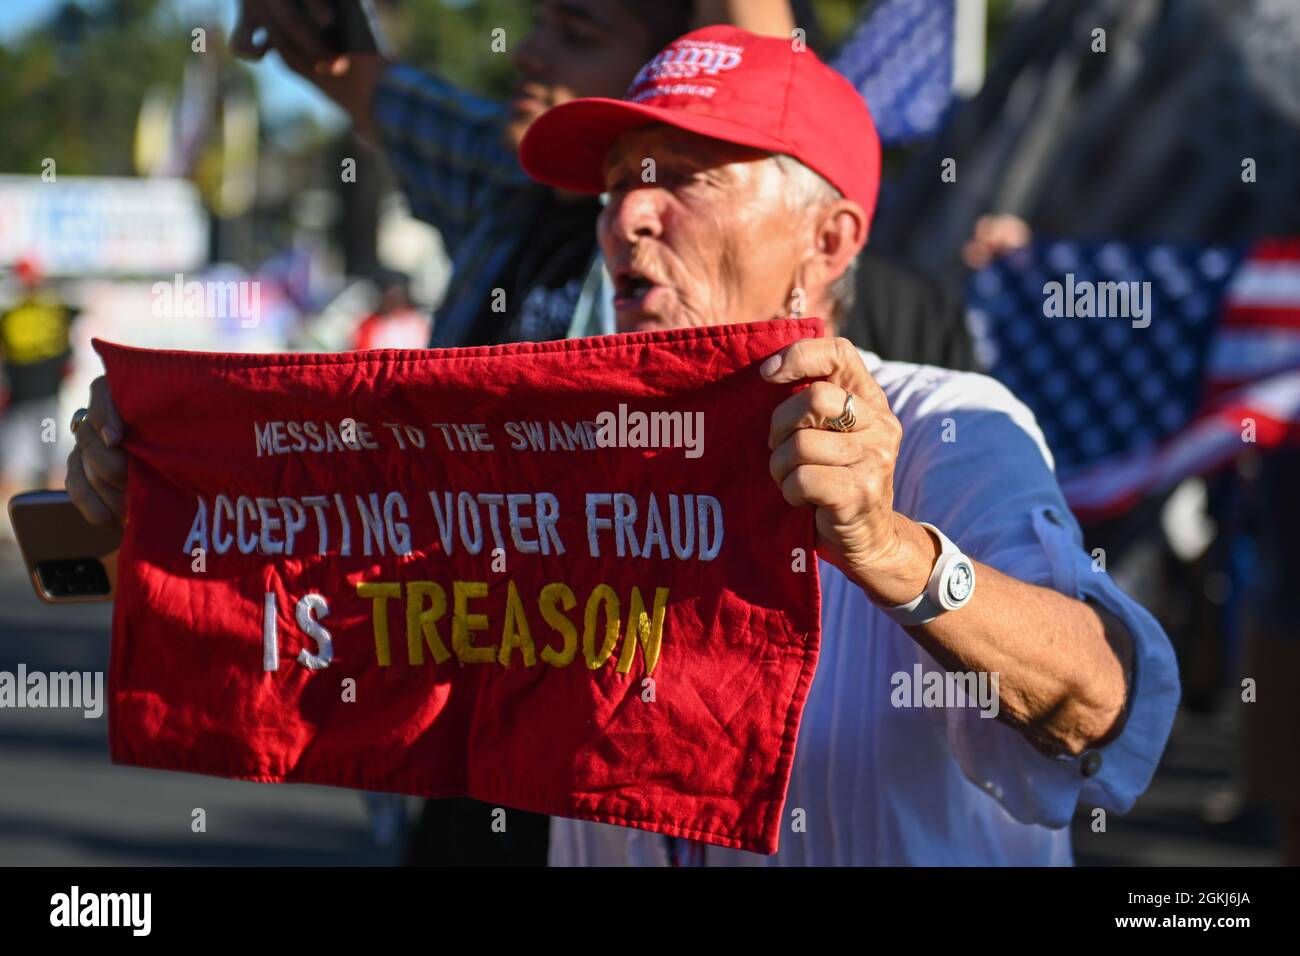 Demonstrators gather near Long Beach City College to protest a Vote No rally for Gavin Newsom, attended by President Joe Biden, Monday, Sept. 13, 2021 Stock Photo